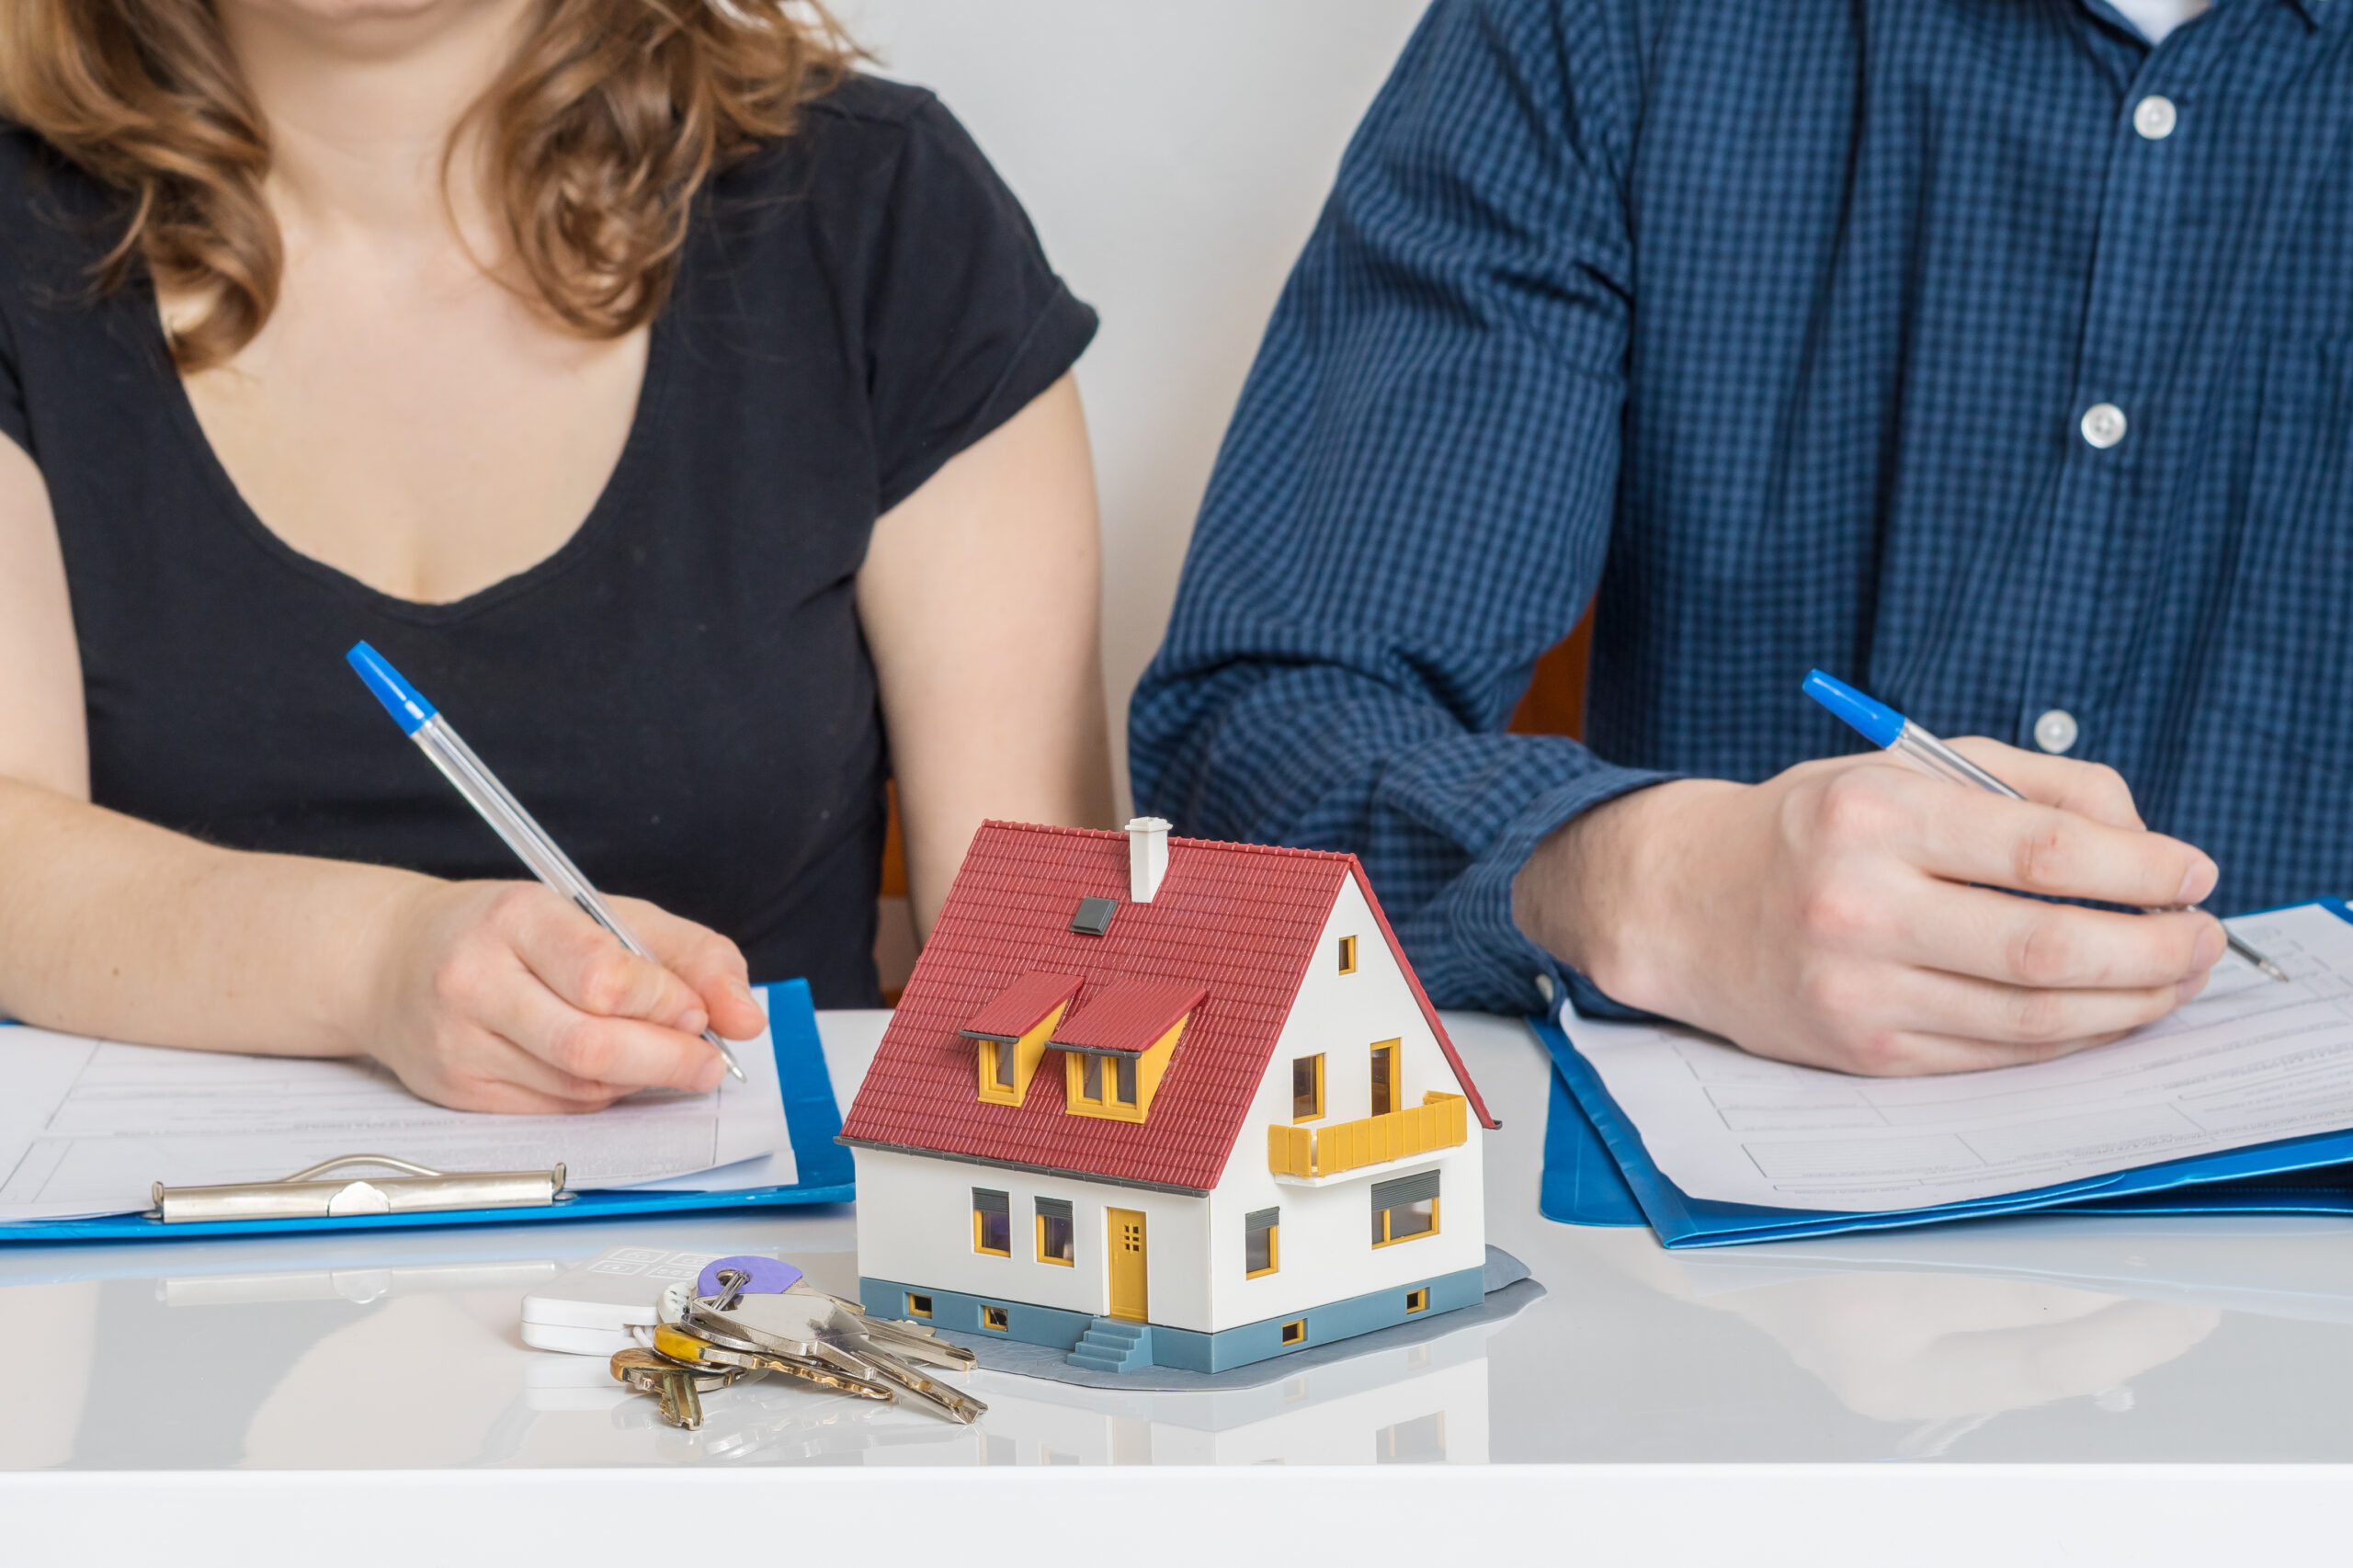 dividing investment property in a divorce in California